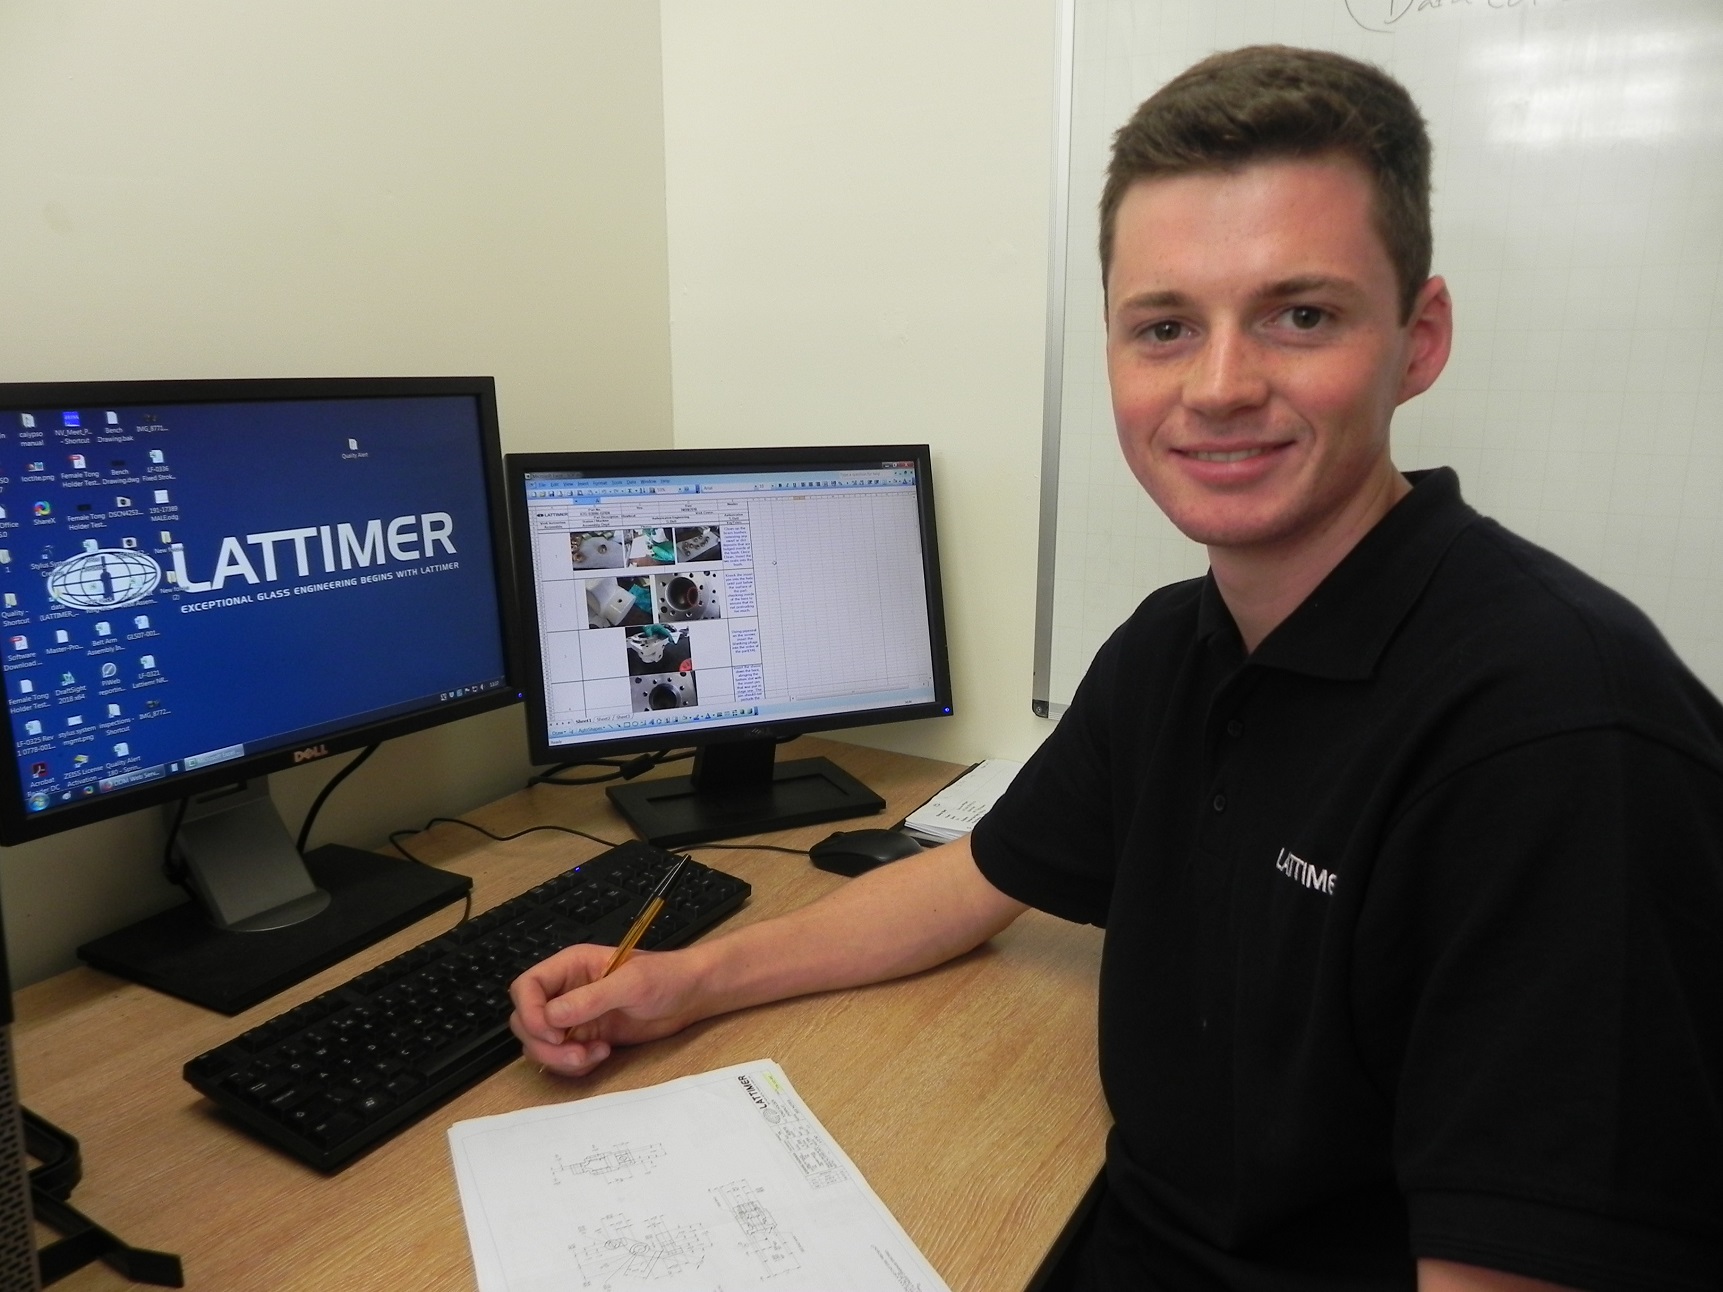 New Glass Products Trainee at Lattimer